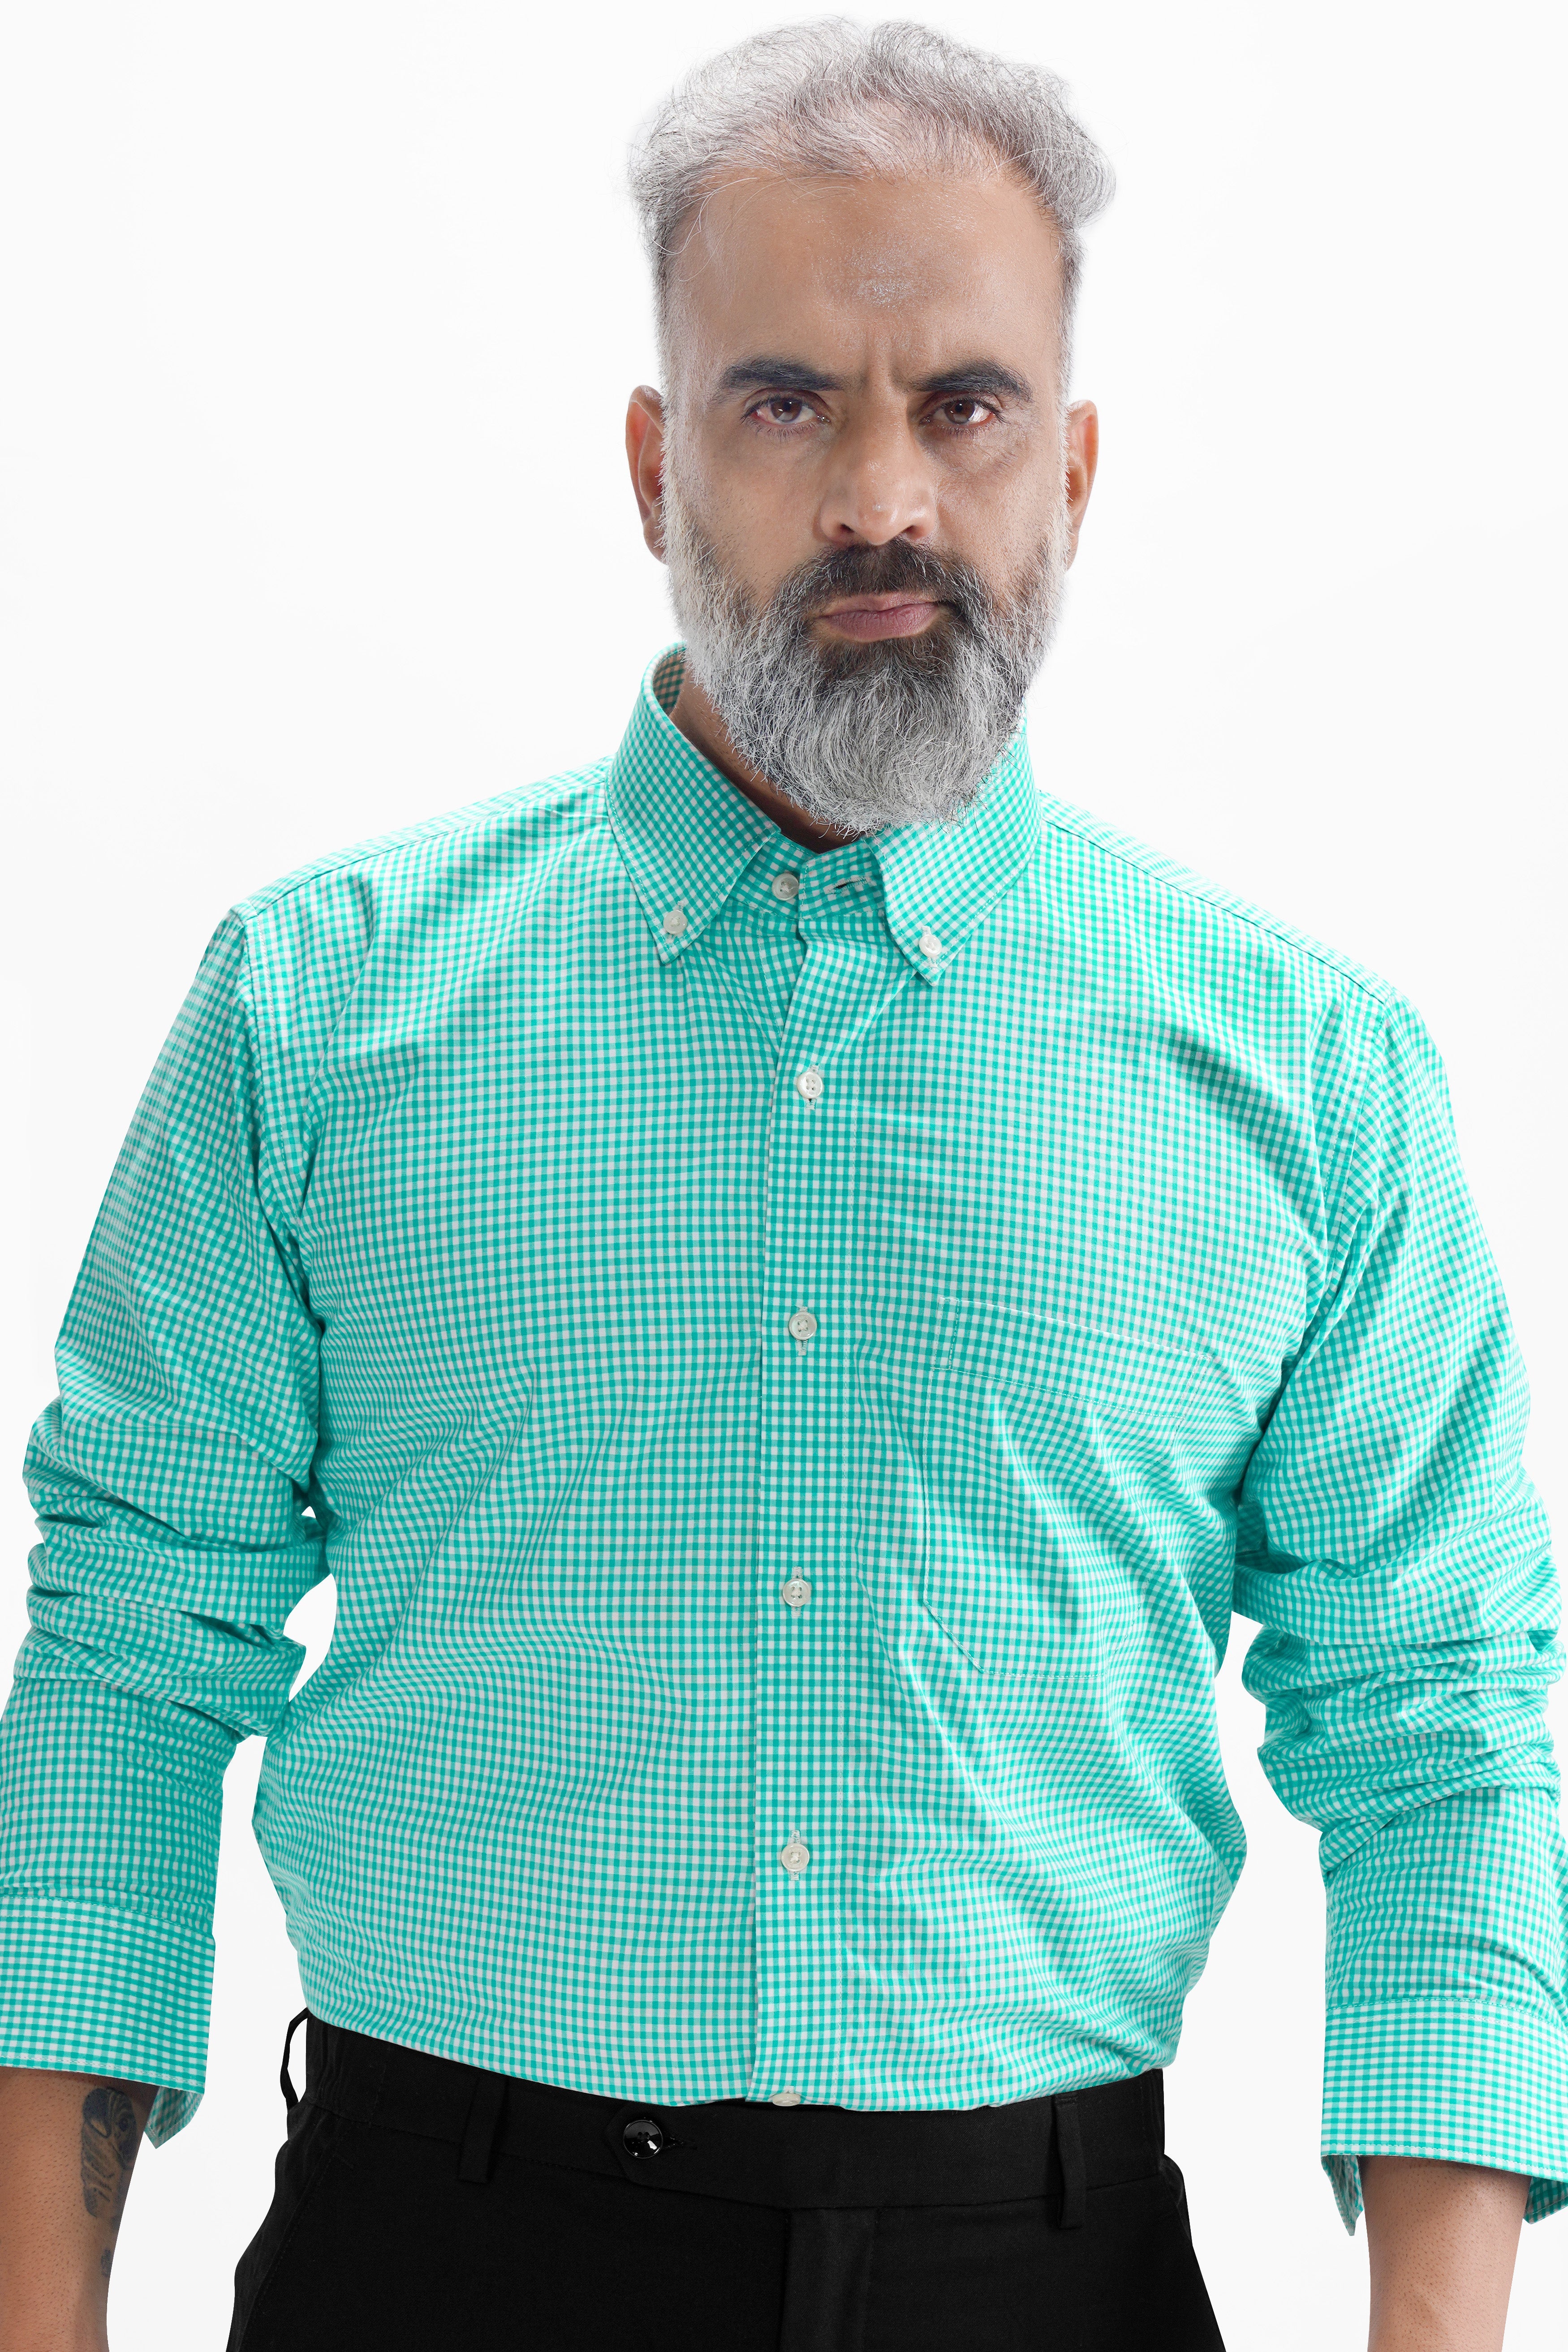 Turquoise Green with Bright White Gingham Checkered Premium Cotton Button Down Shirt